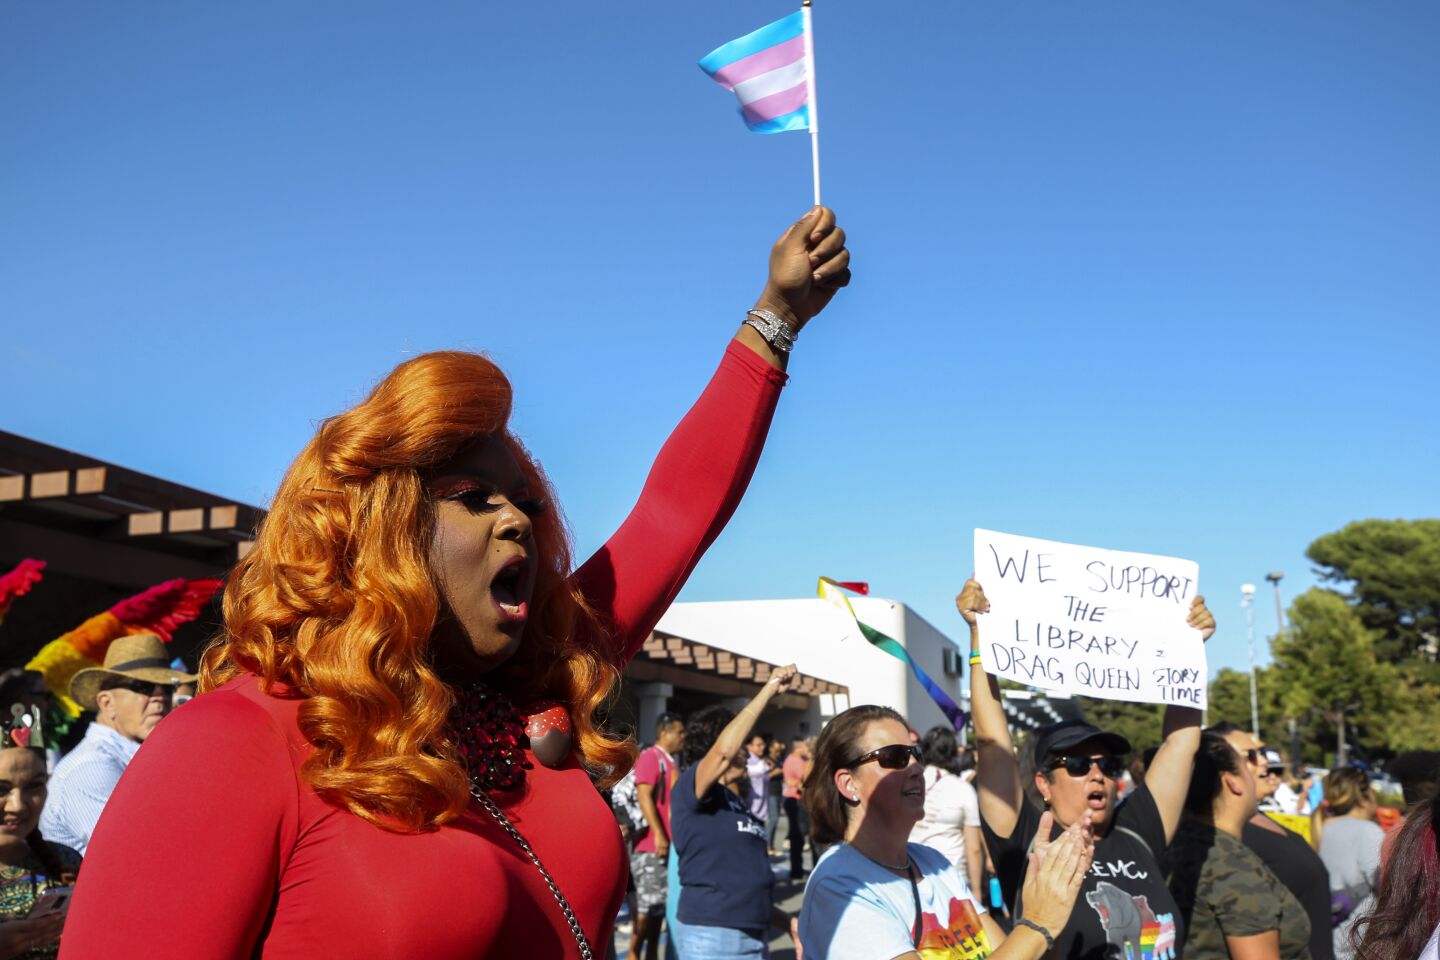 Strawberry Corncakes chants slogans with other supporters of the Drag Queen Story Hour at the Chula Vista Public Library, Civic Center Branch, on Tuesday, September 10, 2019 in Chula Vista, California.